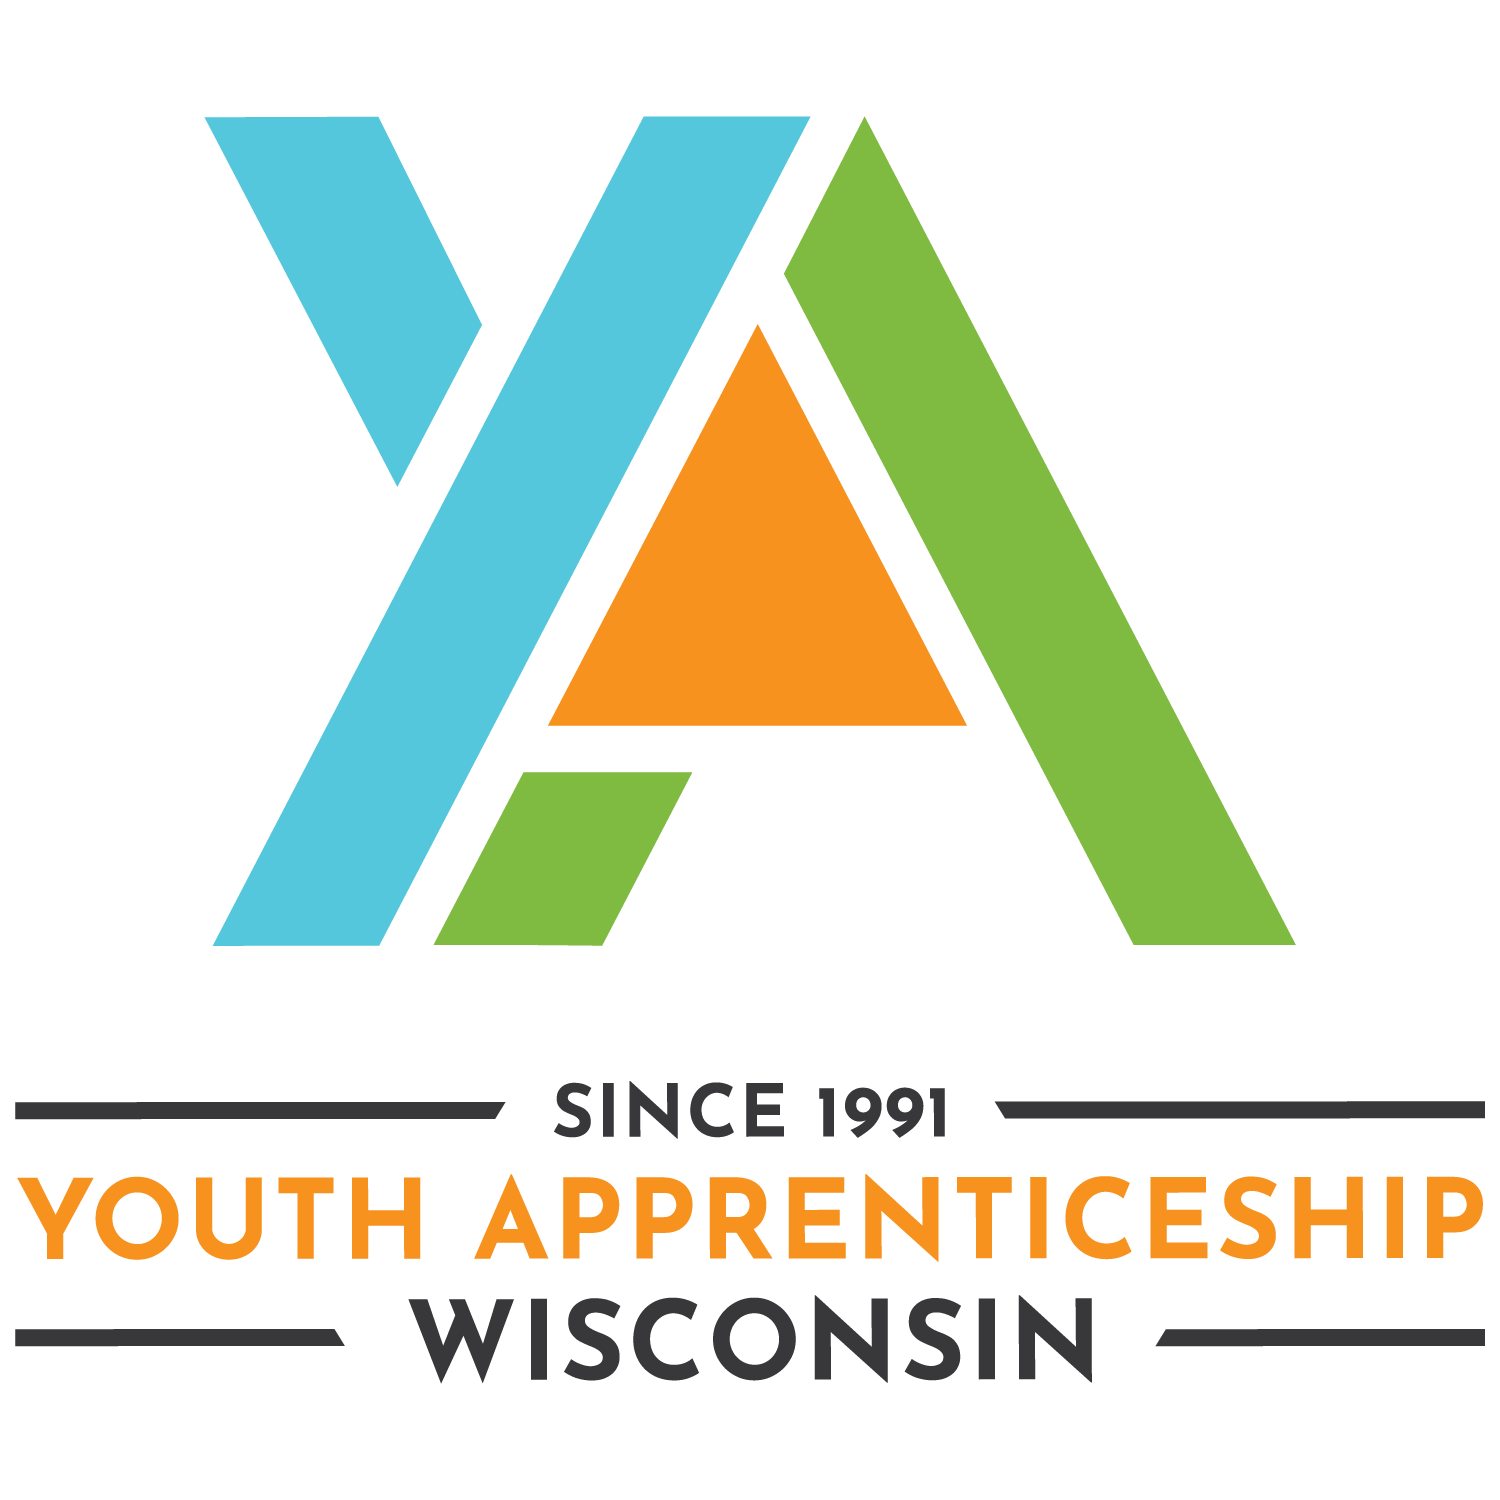 SINCE 1991 - YOUTH APPRENTICESHIP WISCONSIN LOGO